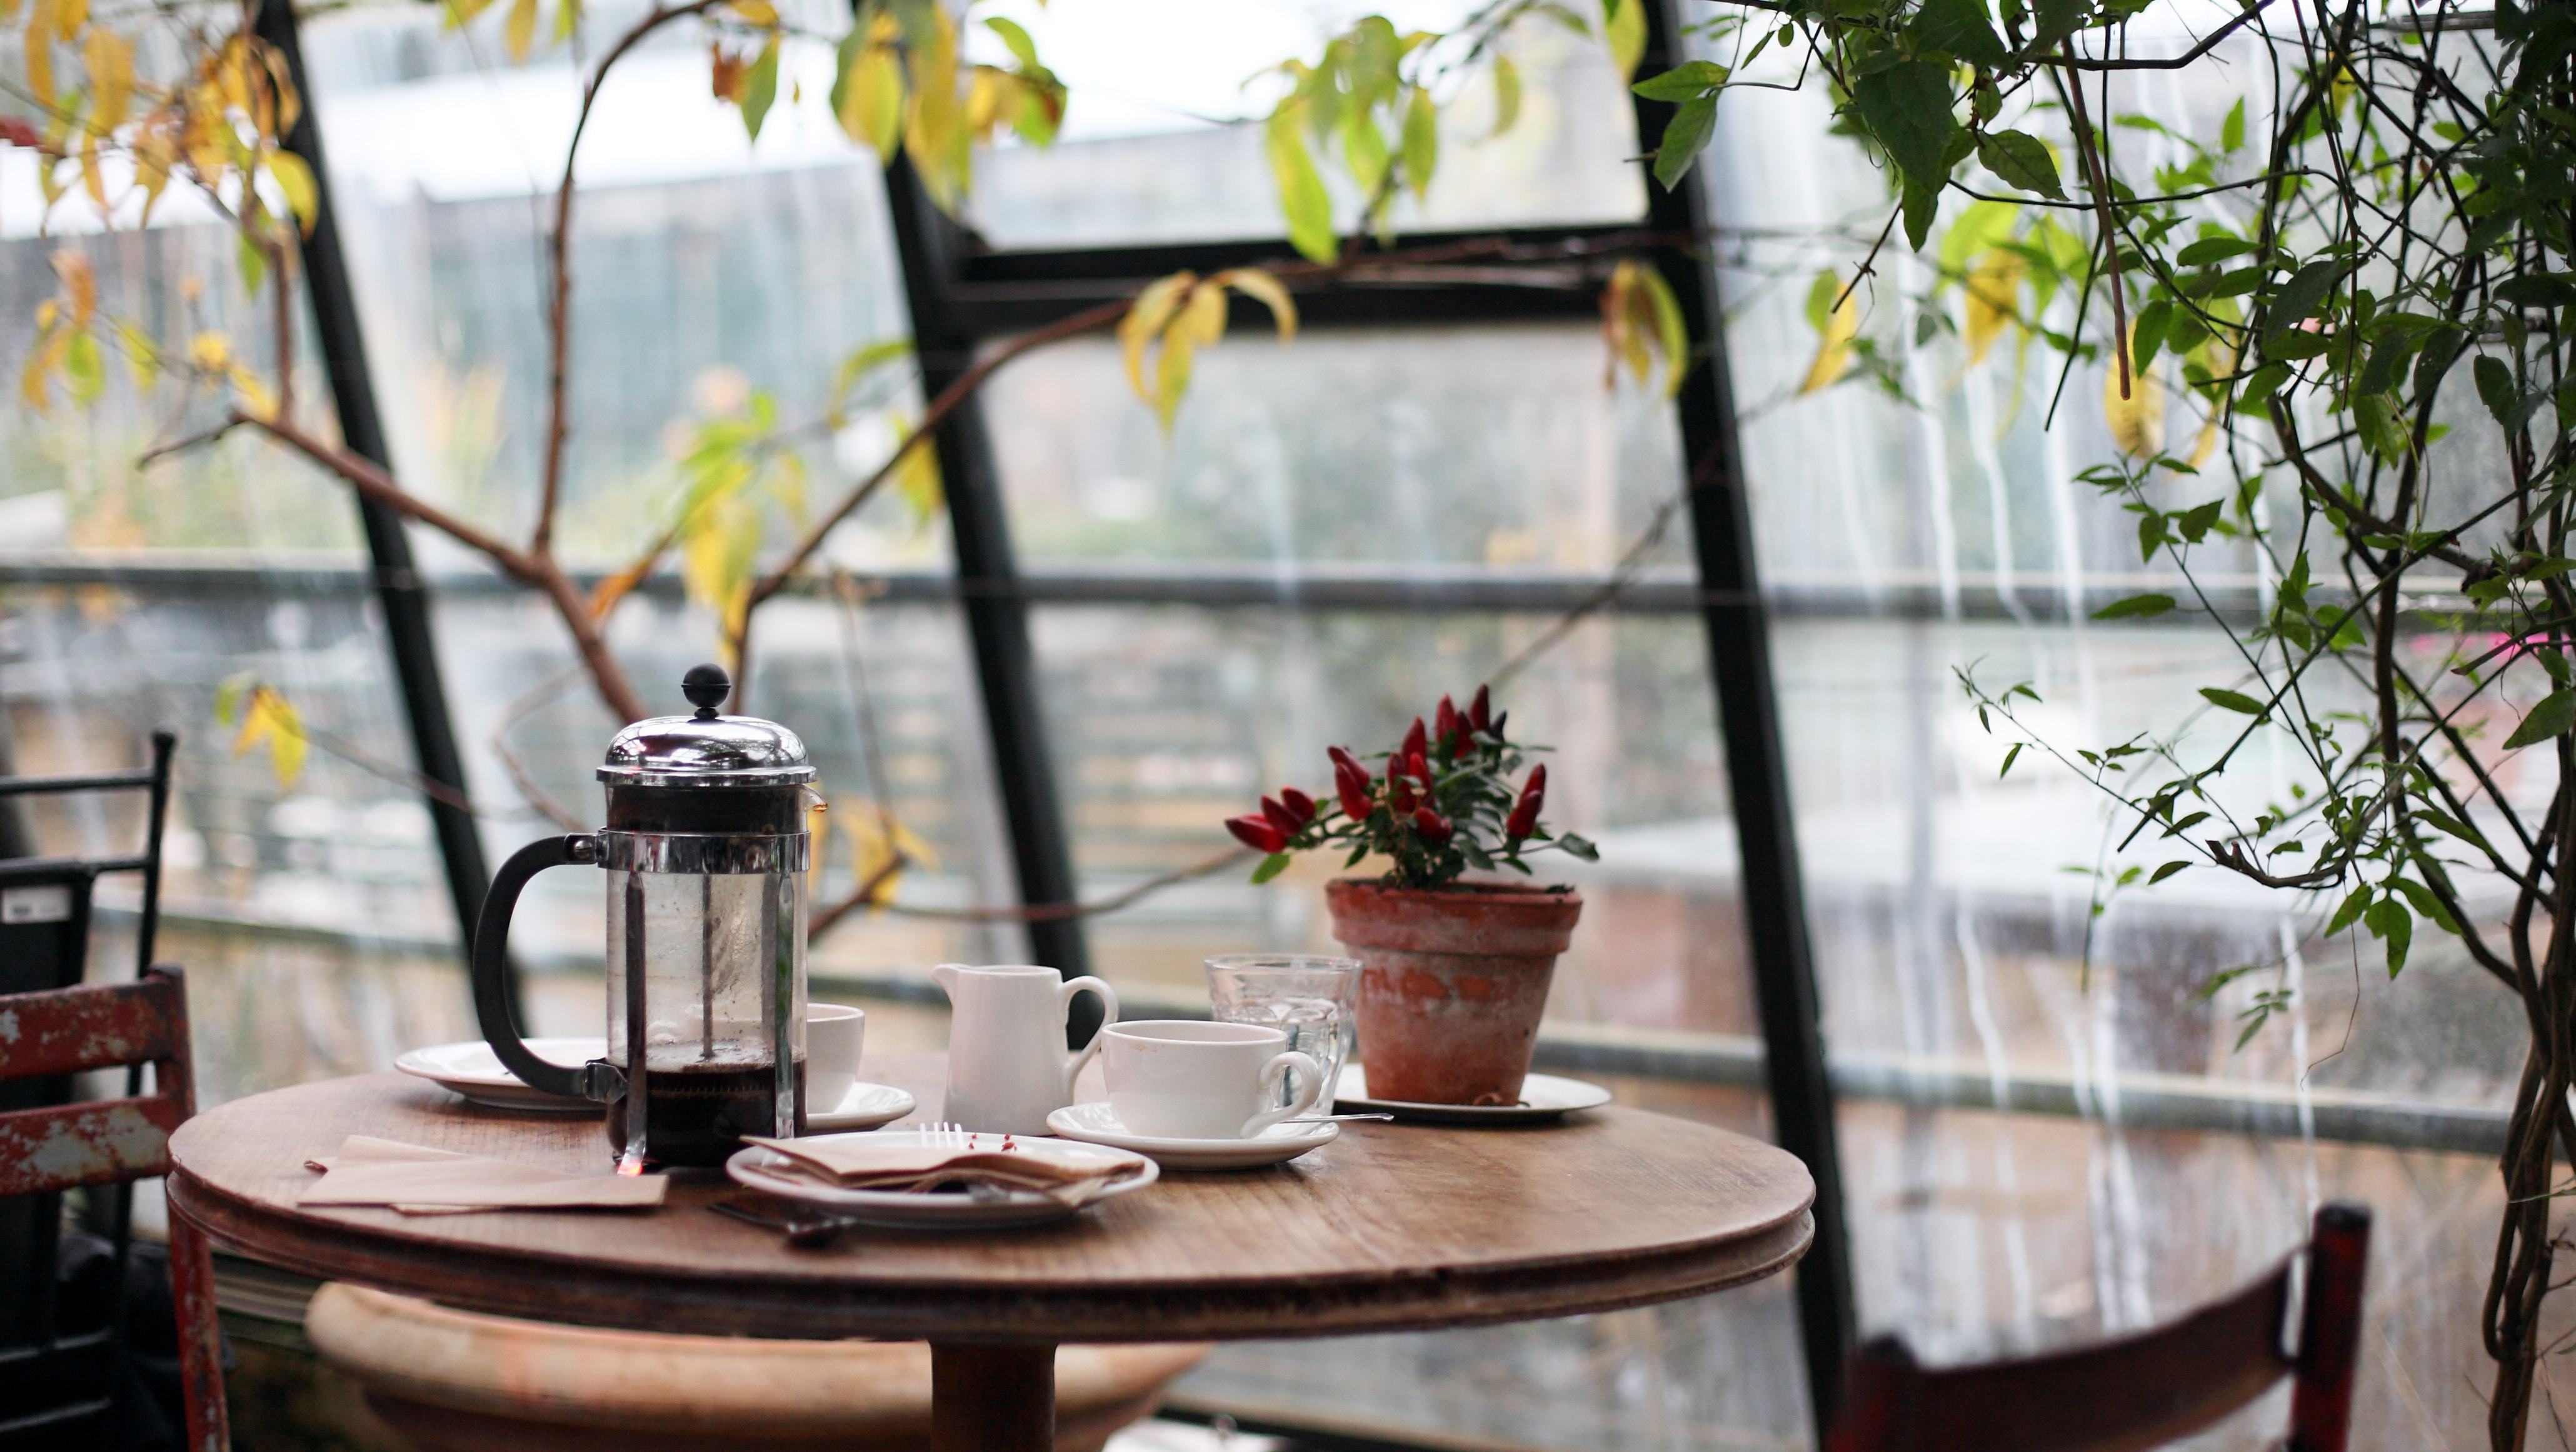 Cafe table with plants and window